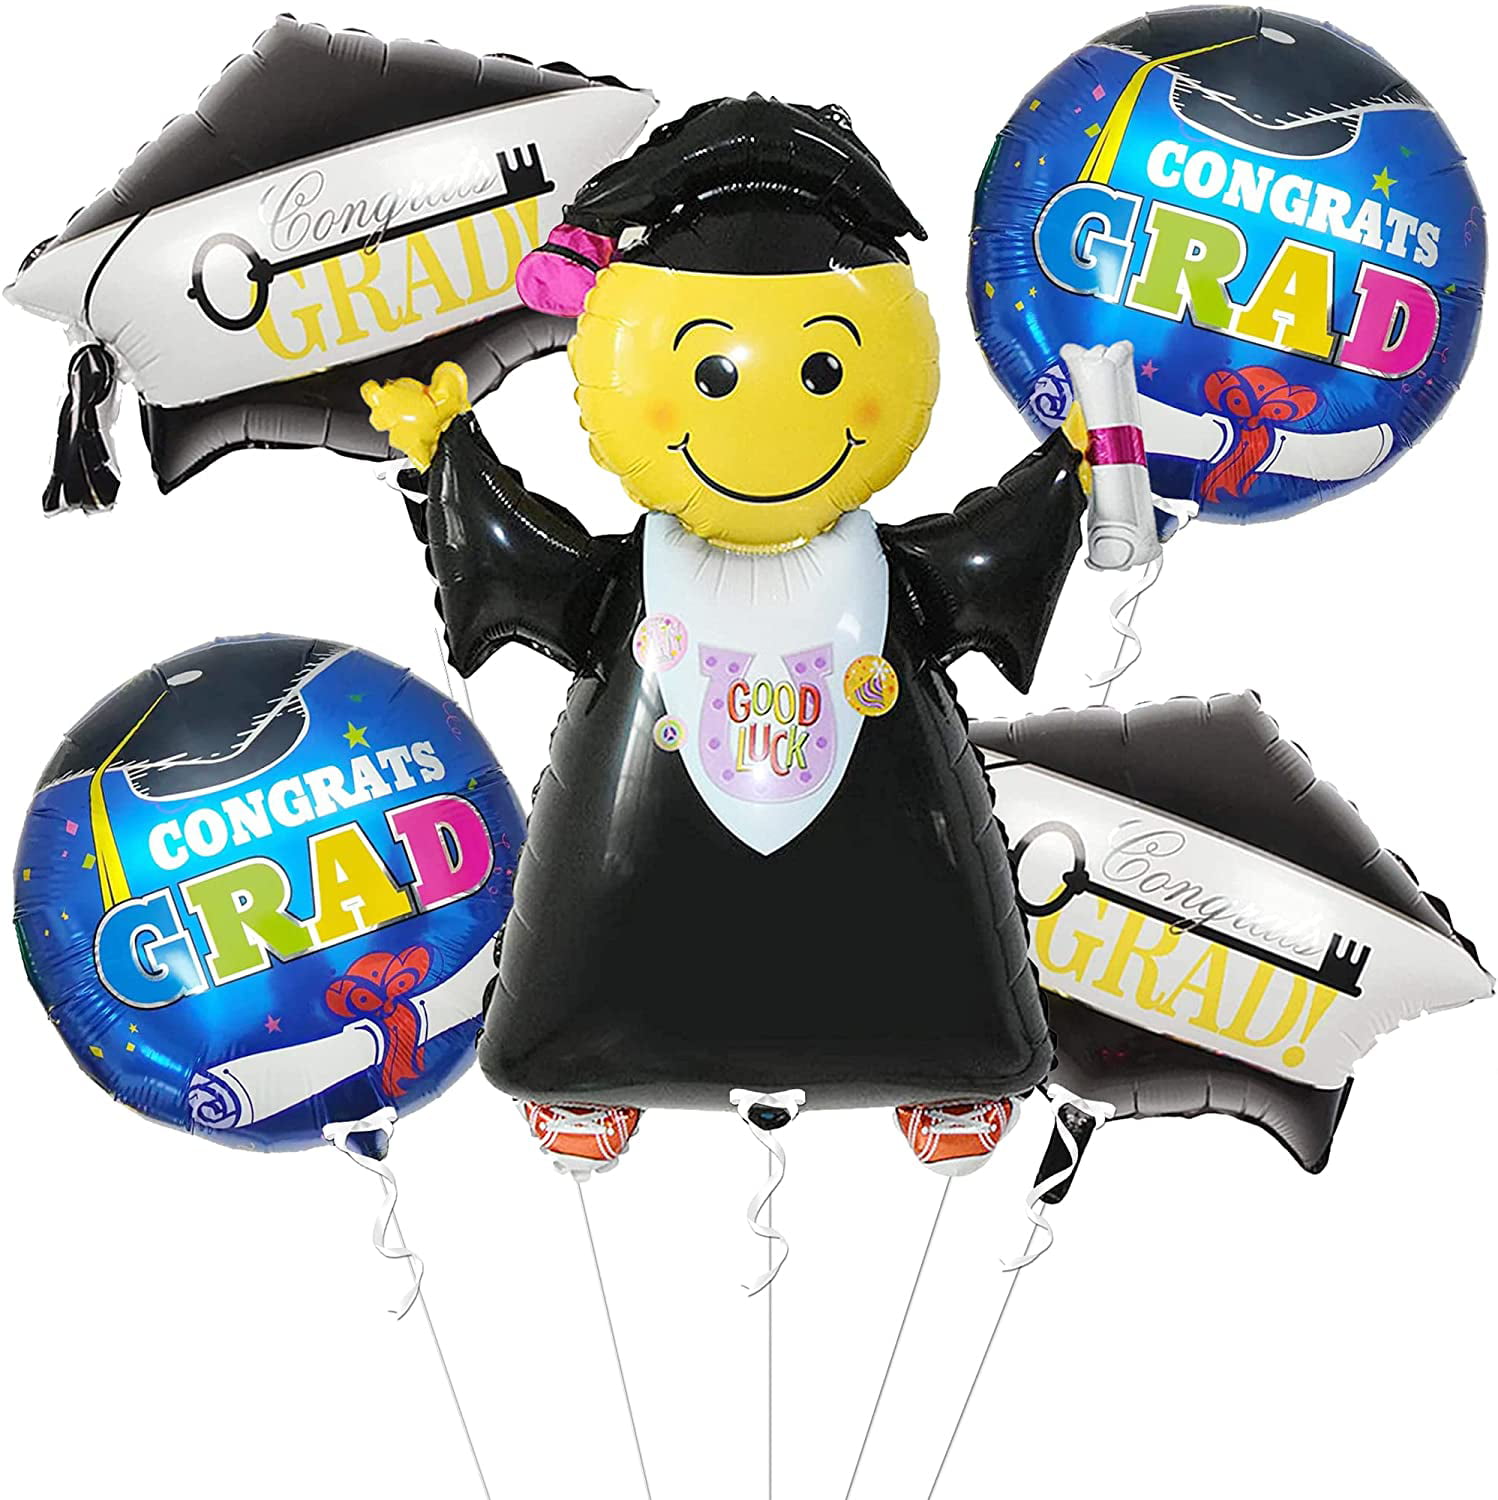 Kindergarten Graduation Decorations Big 40 Inch Smiling Emoji Face Graduation Balloons with Graduation Cap Balloons Graduation Party Decorations 2022 Jumping Grad With Way To Go Balloons 